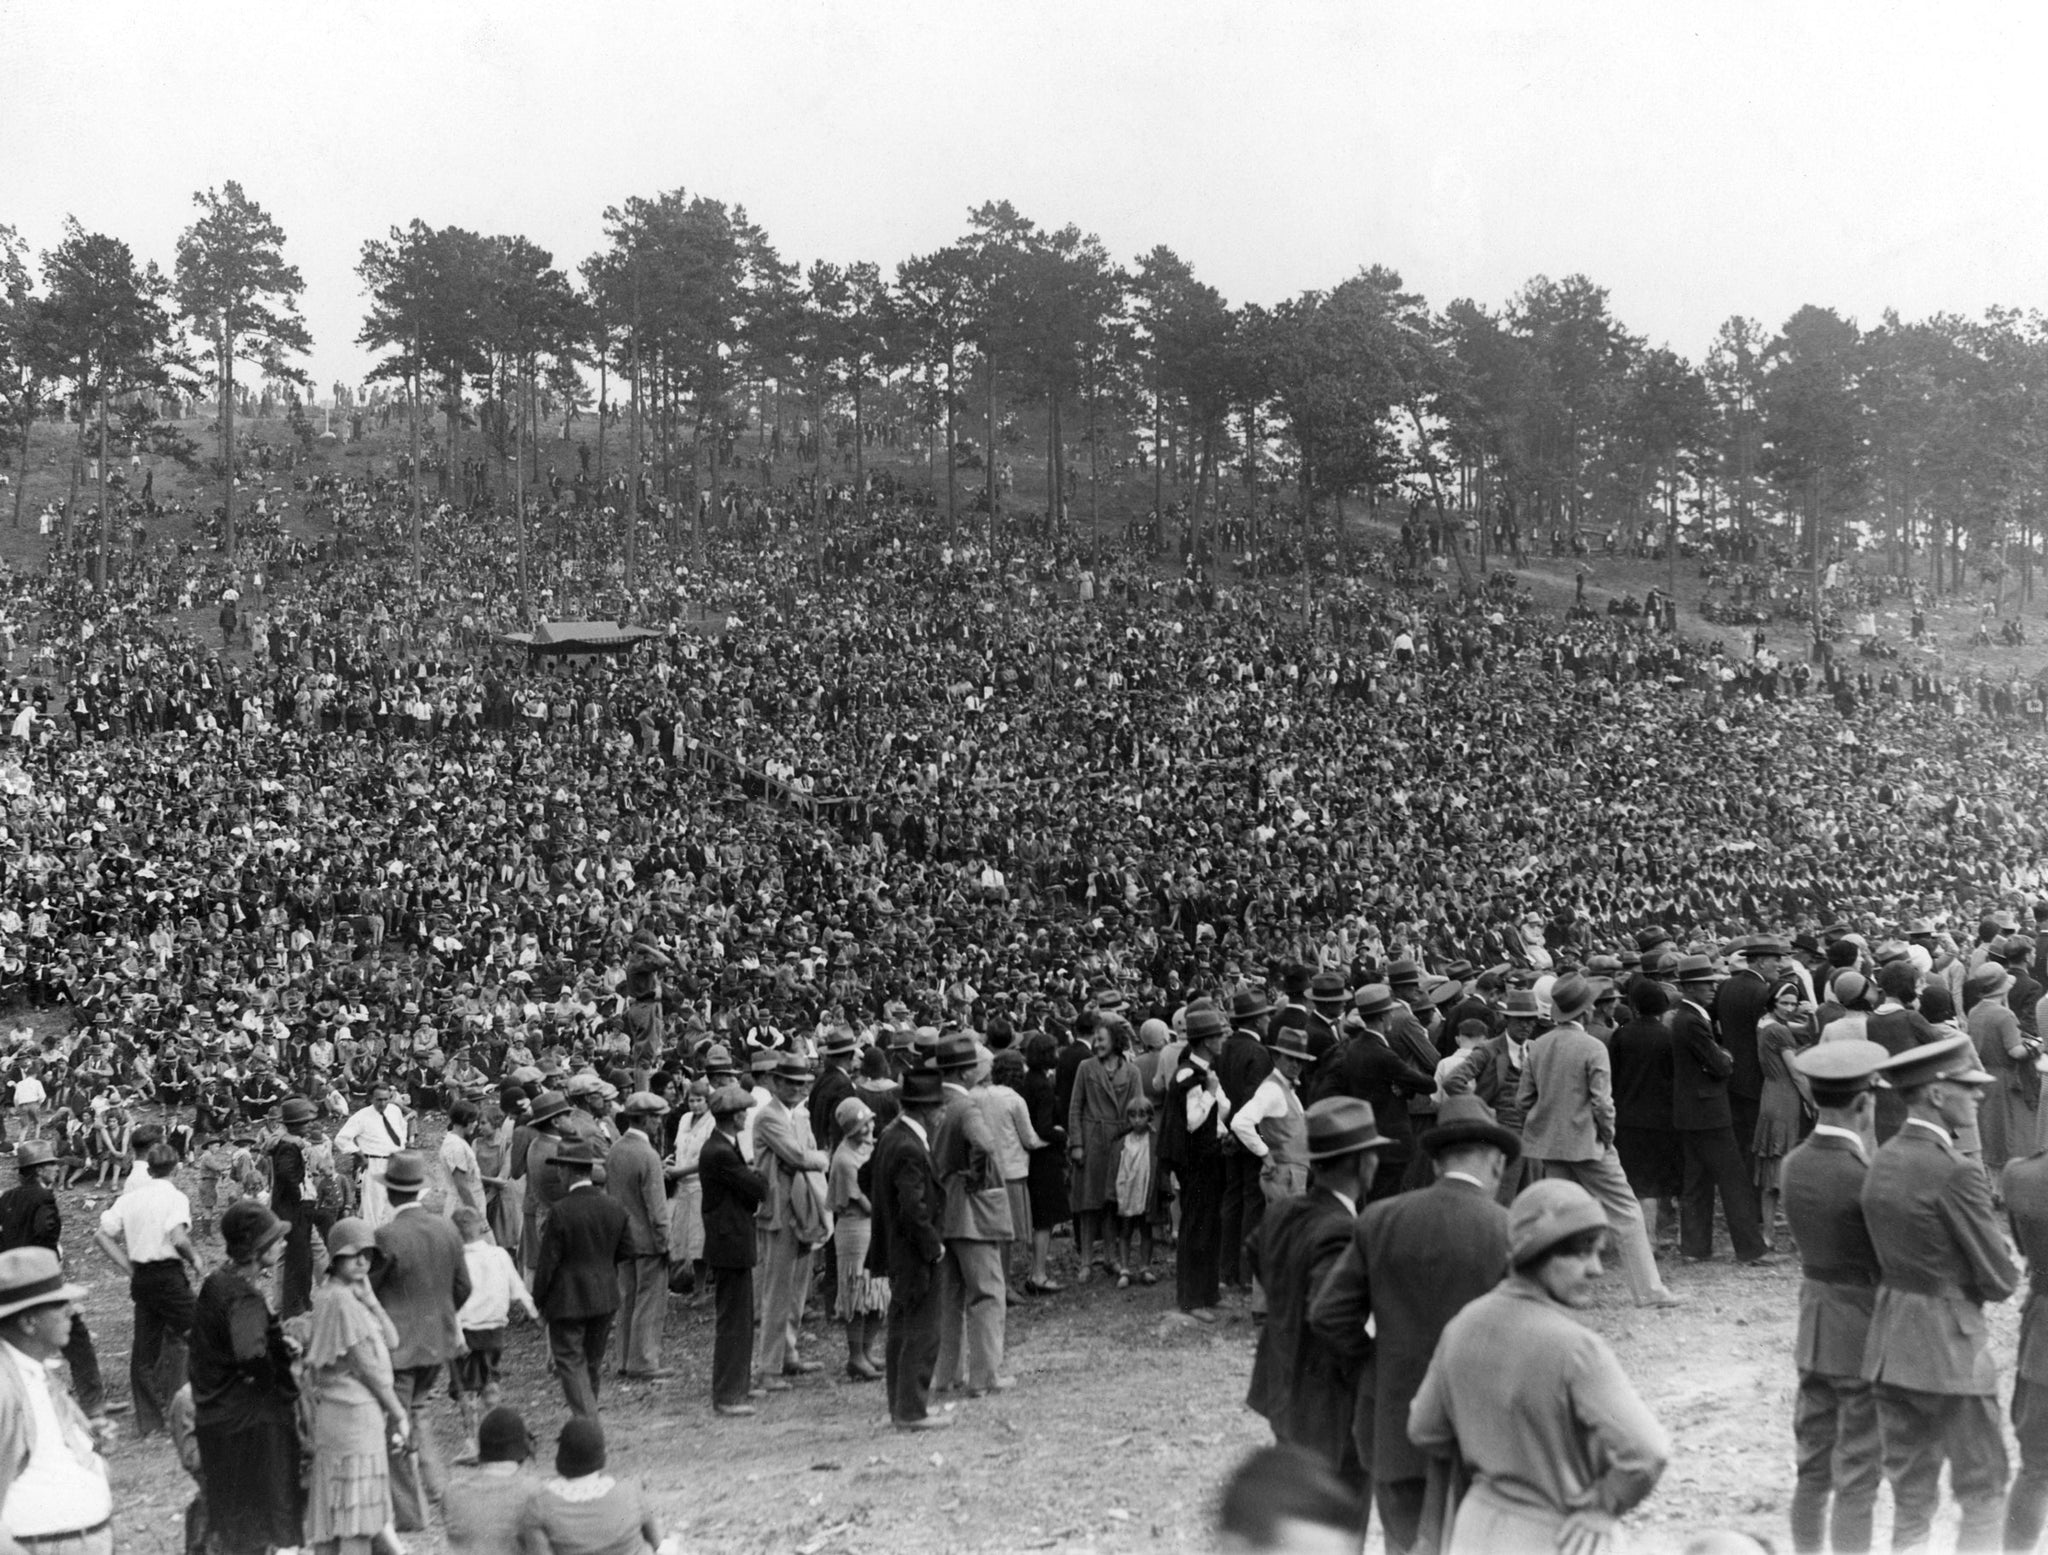 Part of the crowd of 75,000 people gathered to see President Herbert Hoover speak at the 150th anniversary celebration of the Battle of Kings Mountain in 1930. -- Courtesy of Loretta Cozart